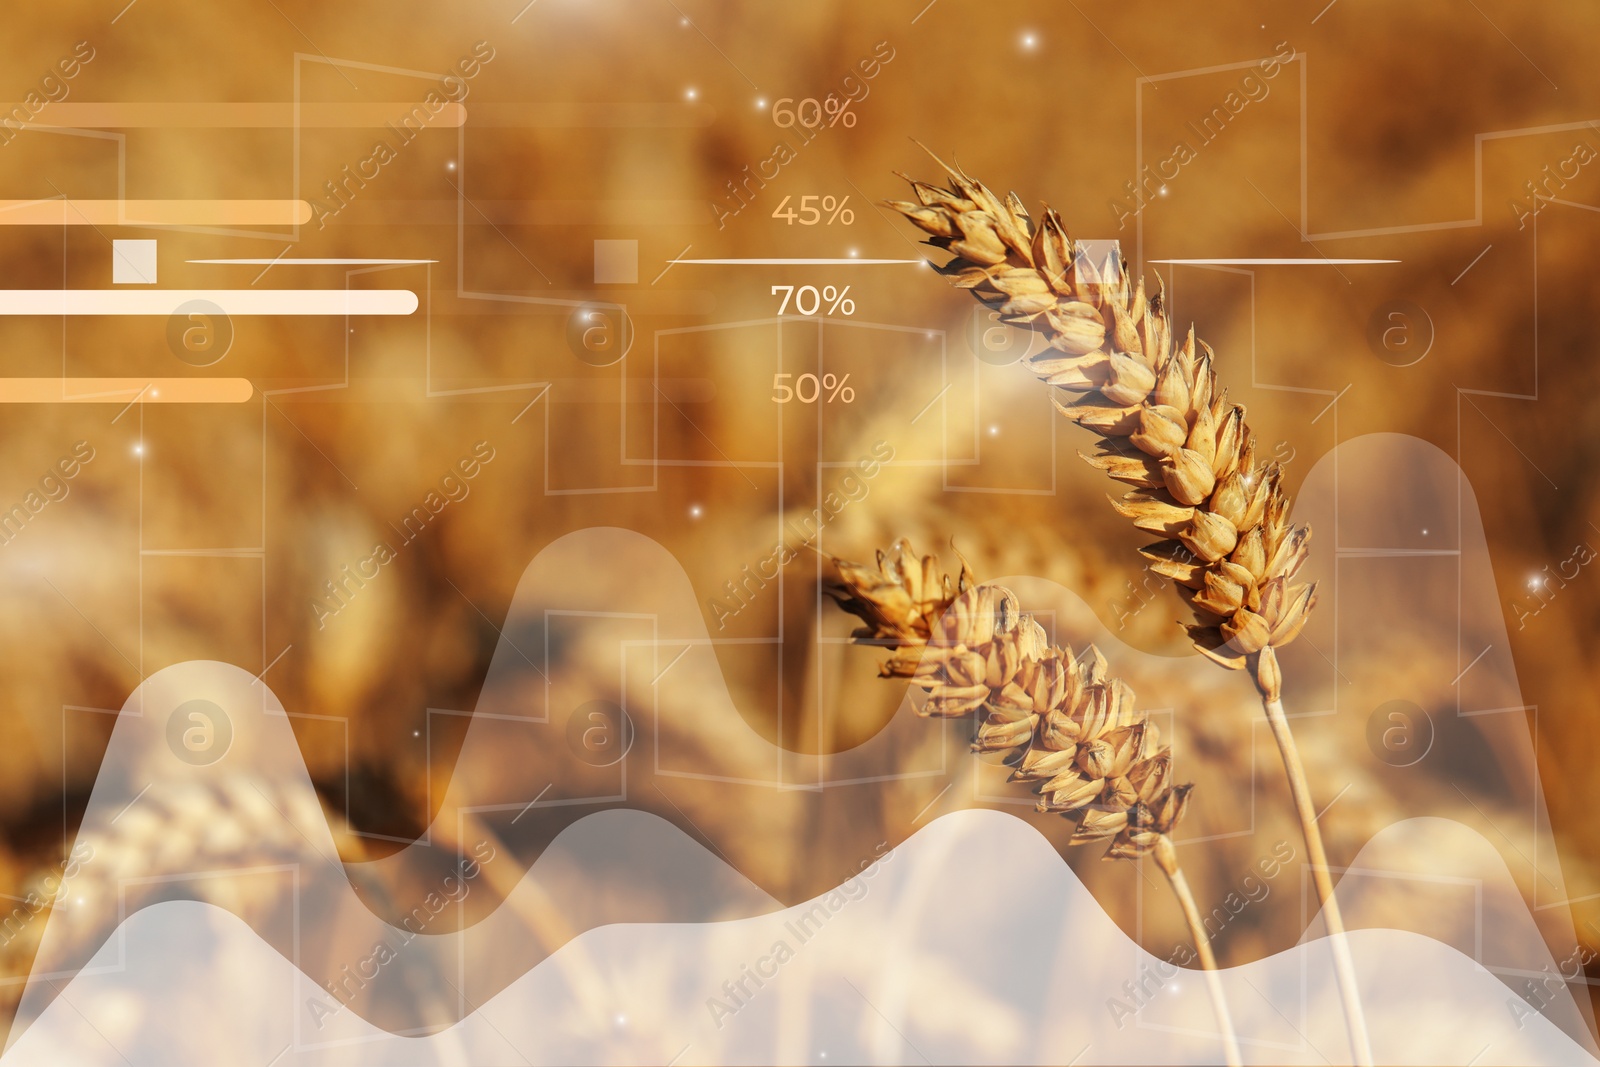 Image of Grain prices. Wheat field and graphs, double exposure